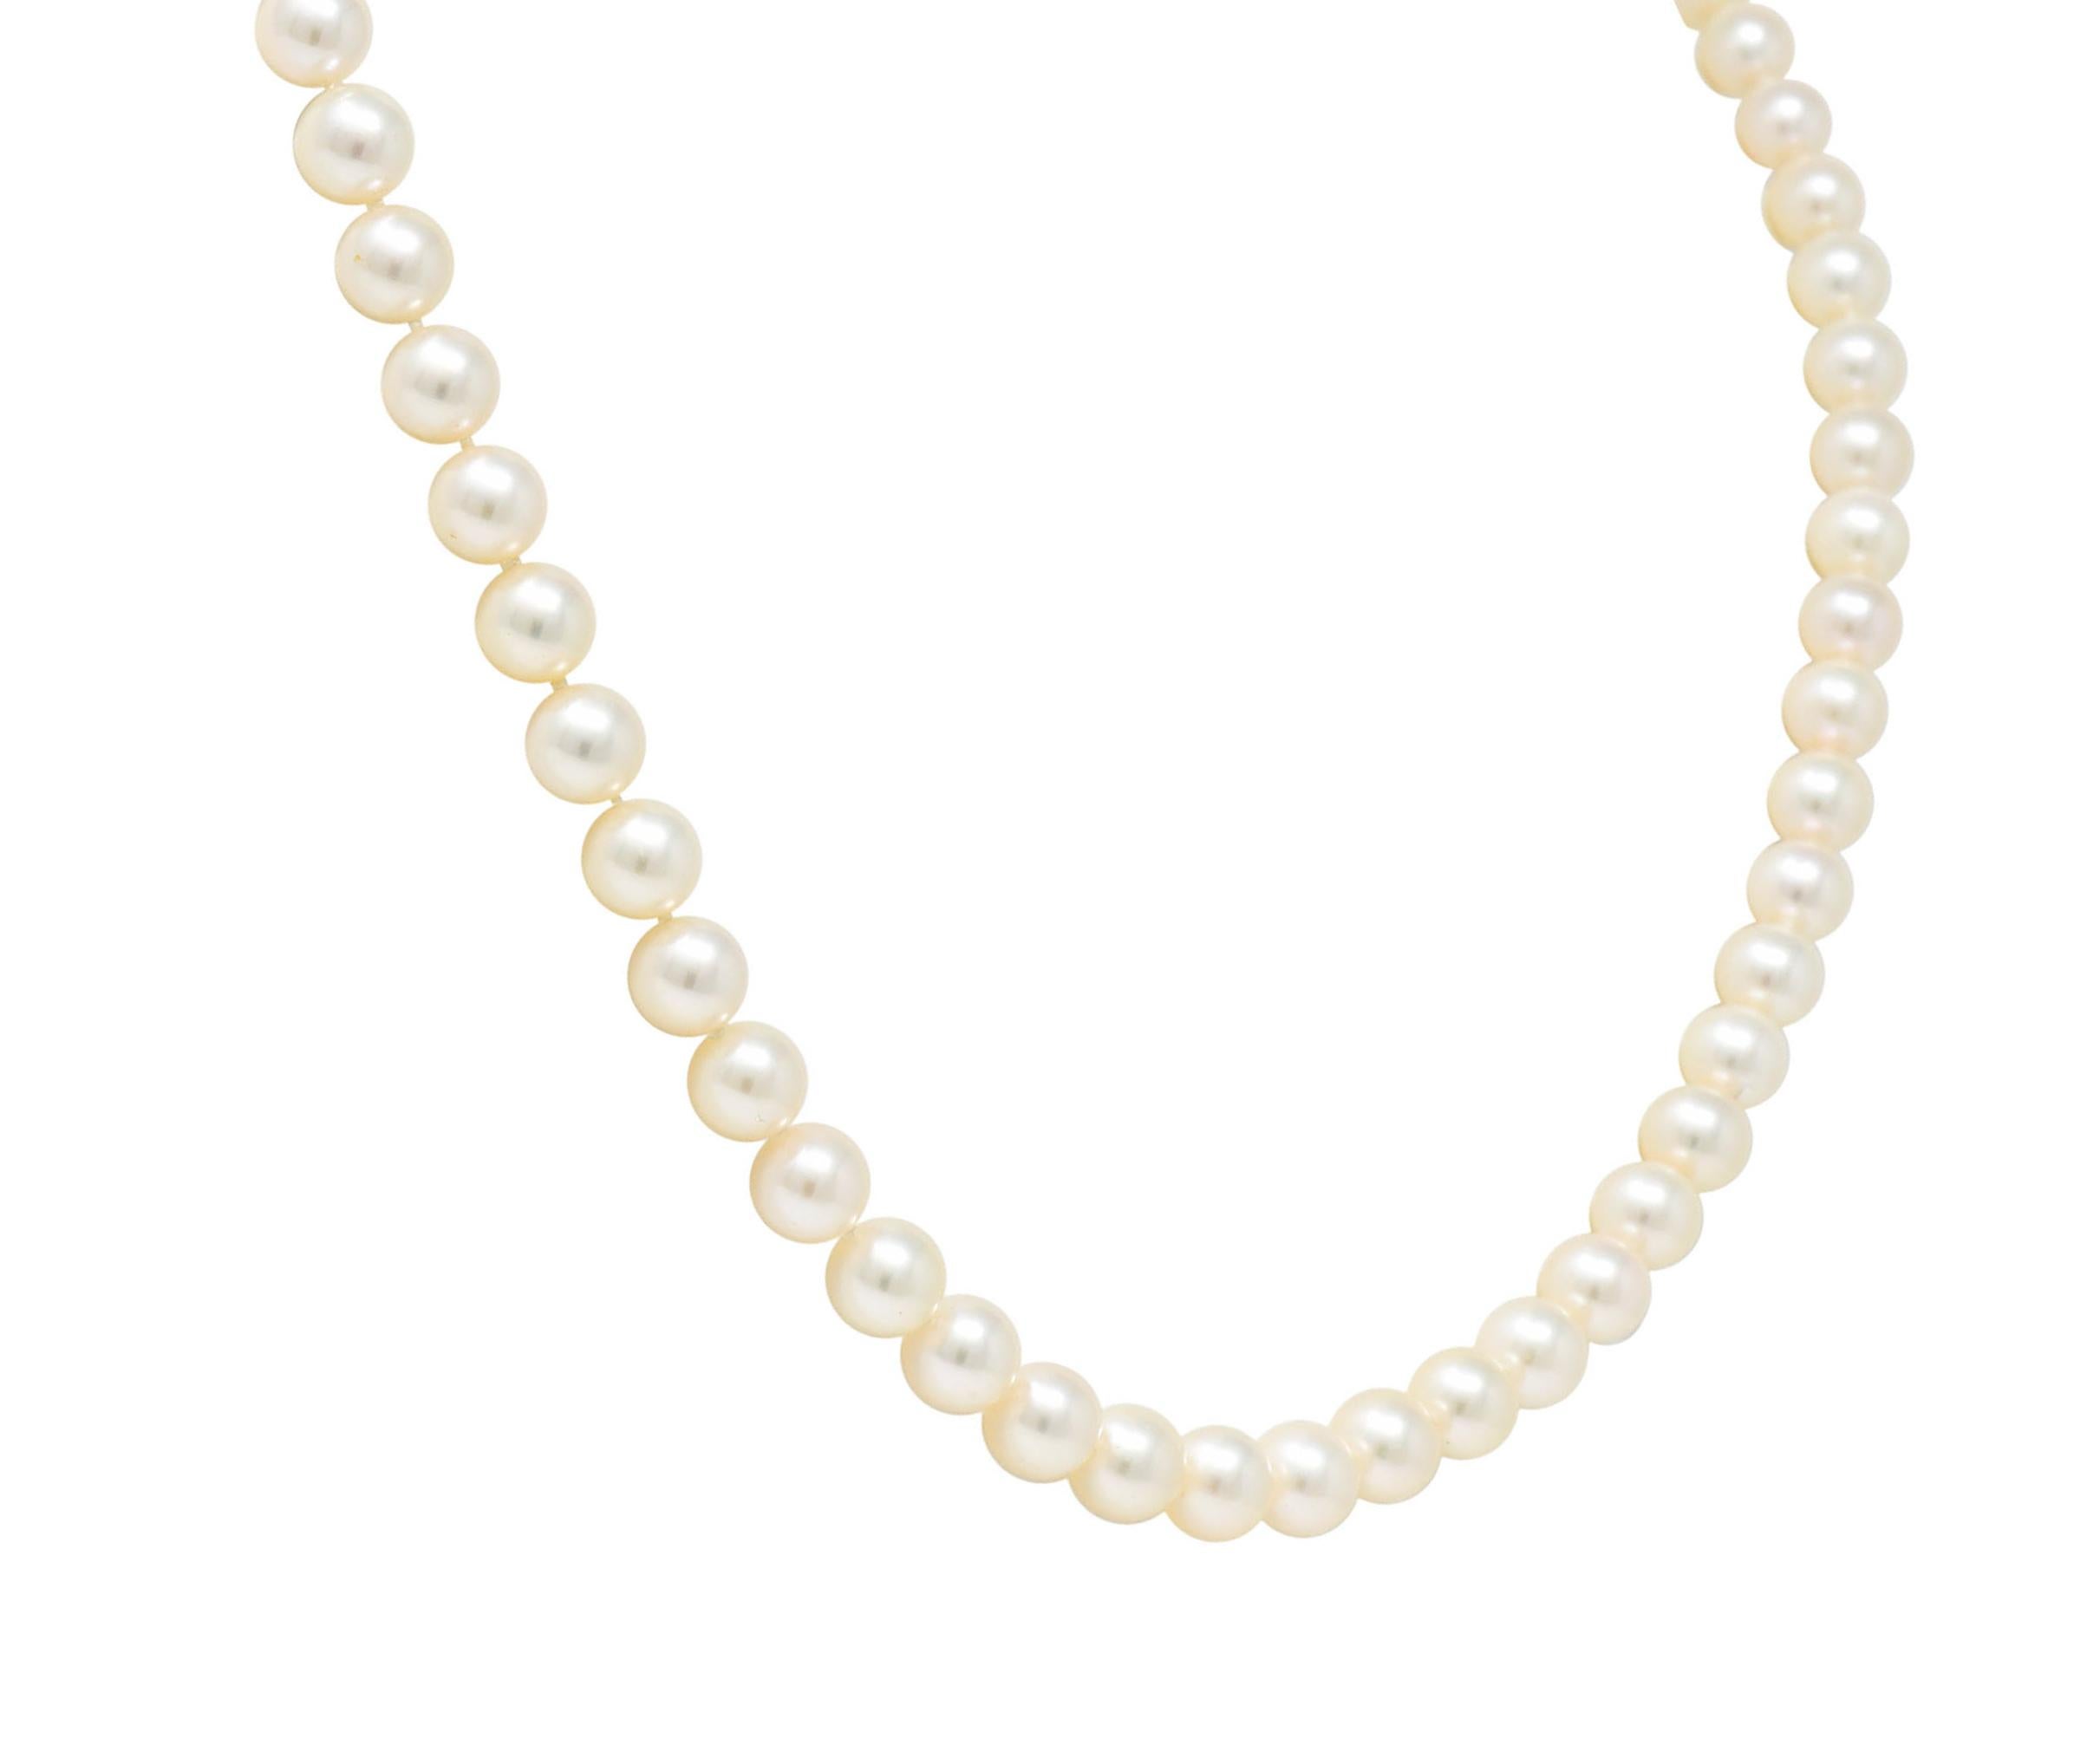 Contemporary Mikimoto Cultured Pearl 18 Karat Gold Matinee Strand Necklace